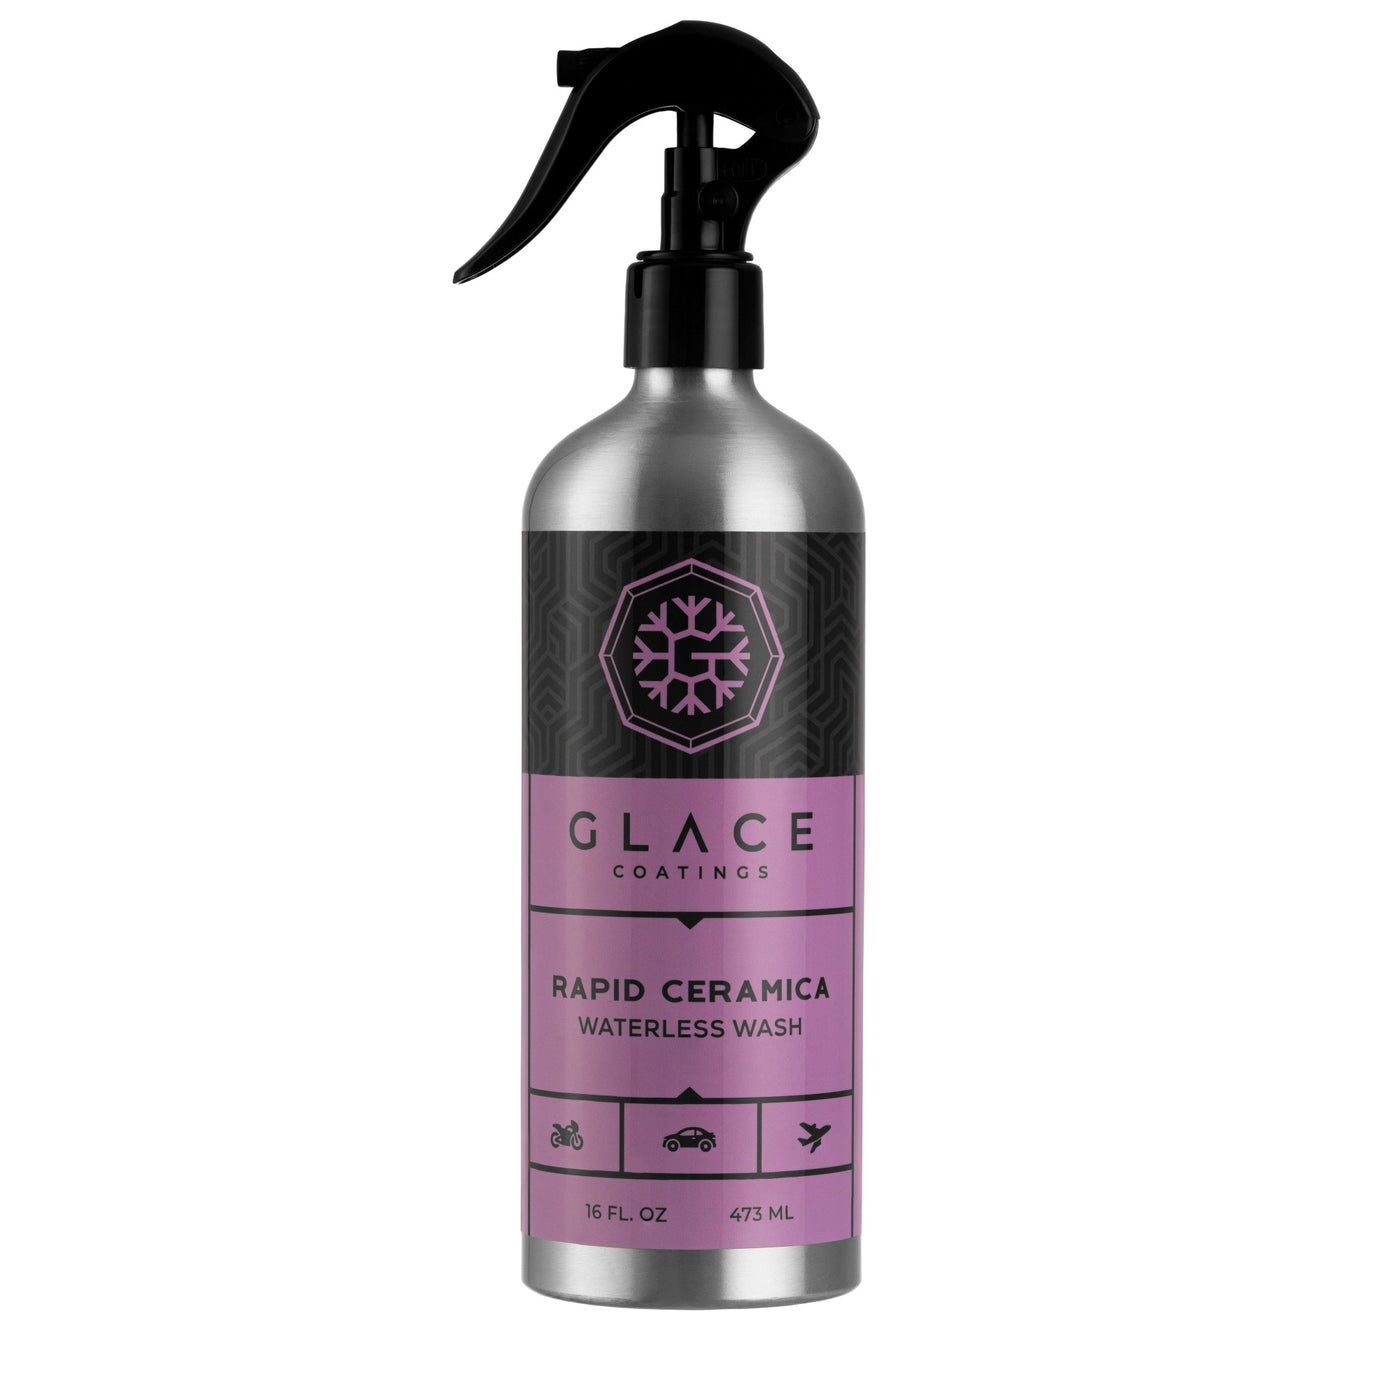 GlaceCoatings Rapid Ceramica aluminum bottle with a purple label and black text